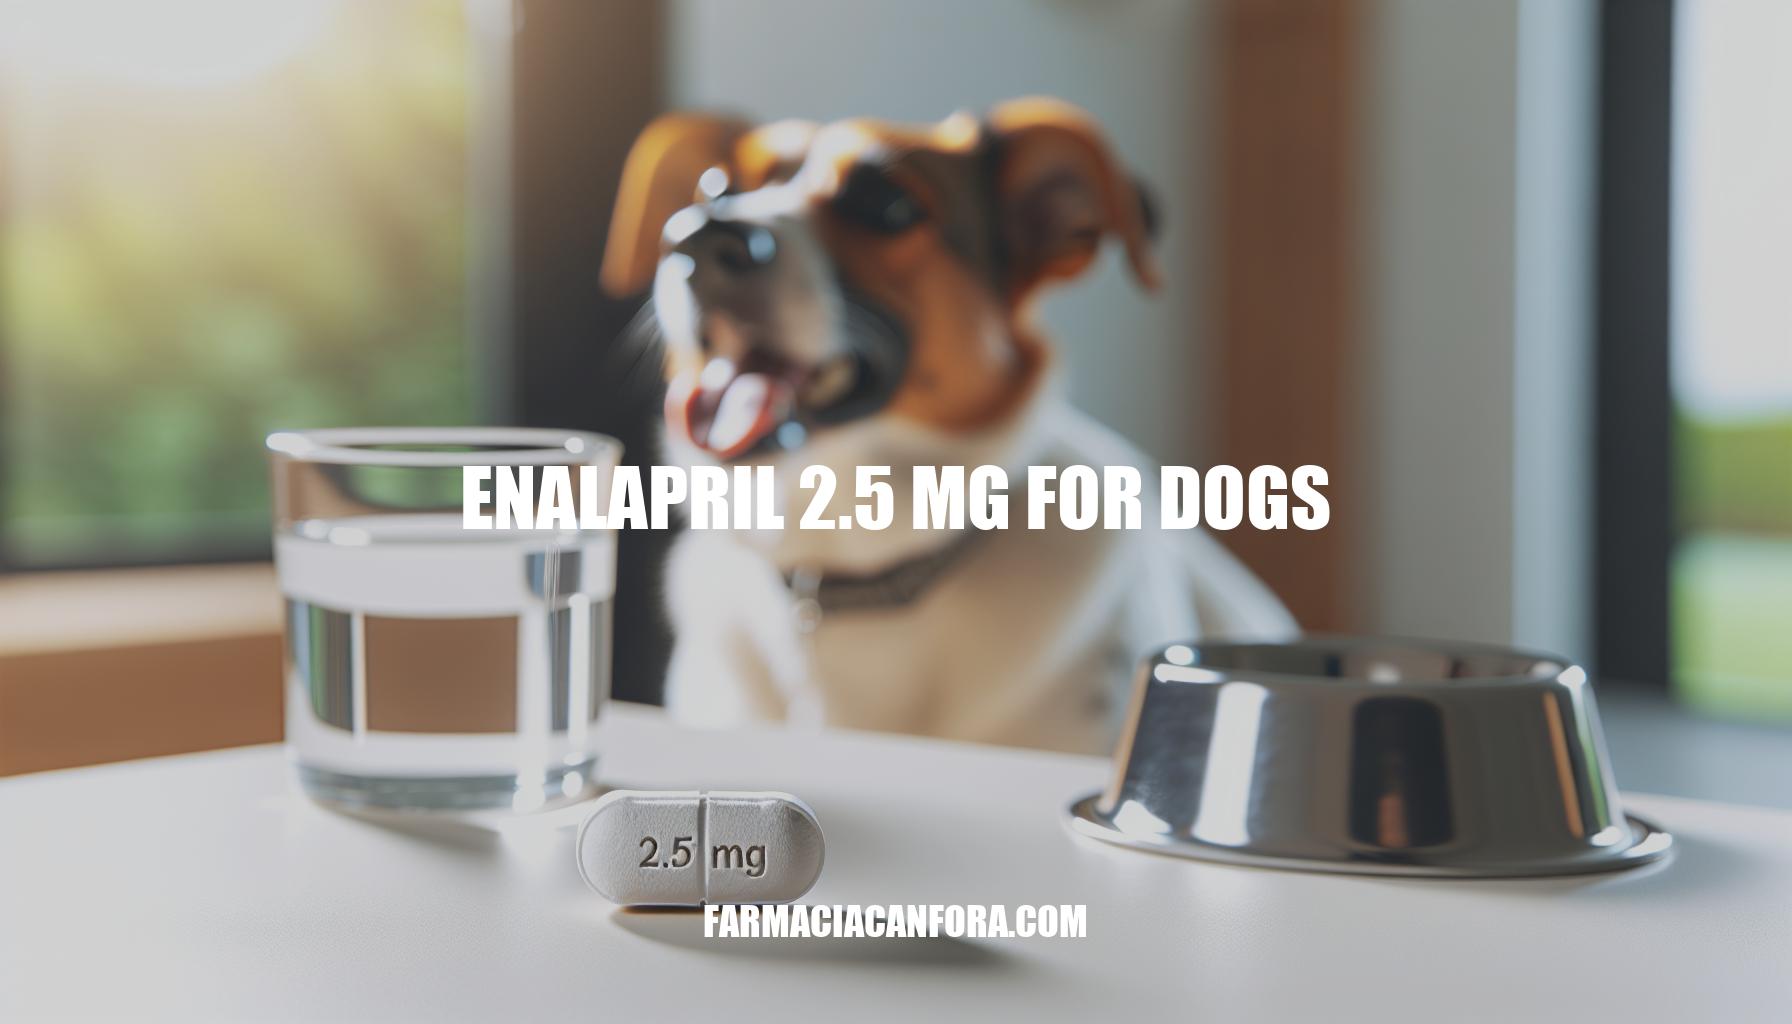 Enalapril 2.5 mg for Dogs: Benefits, Dosage, and Side Effects